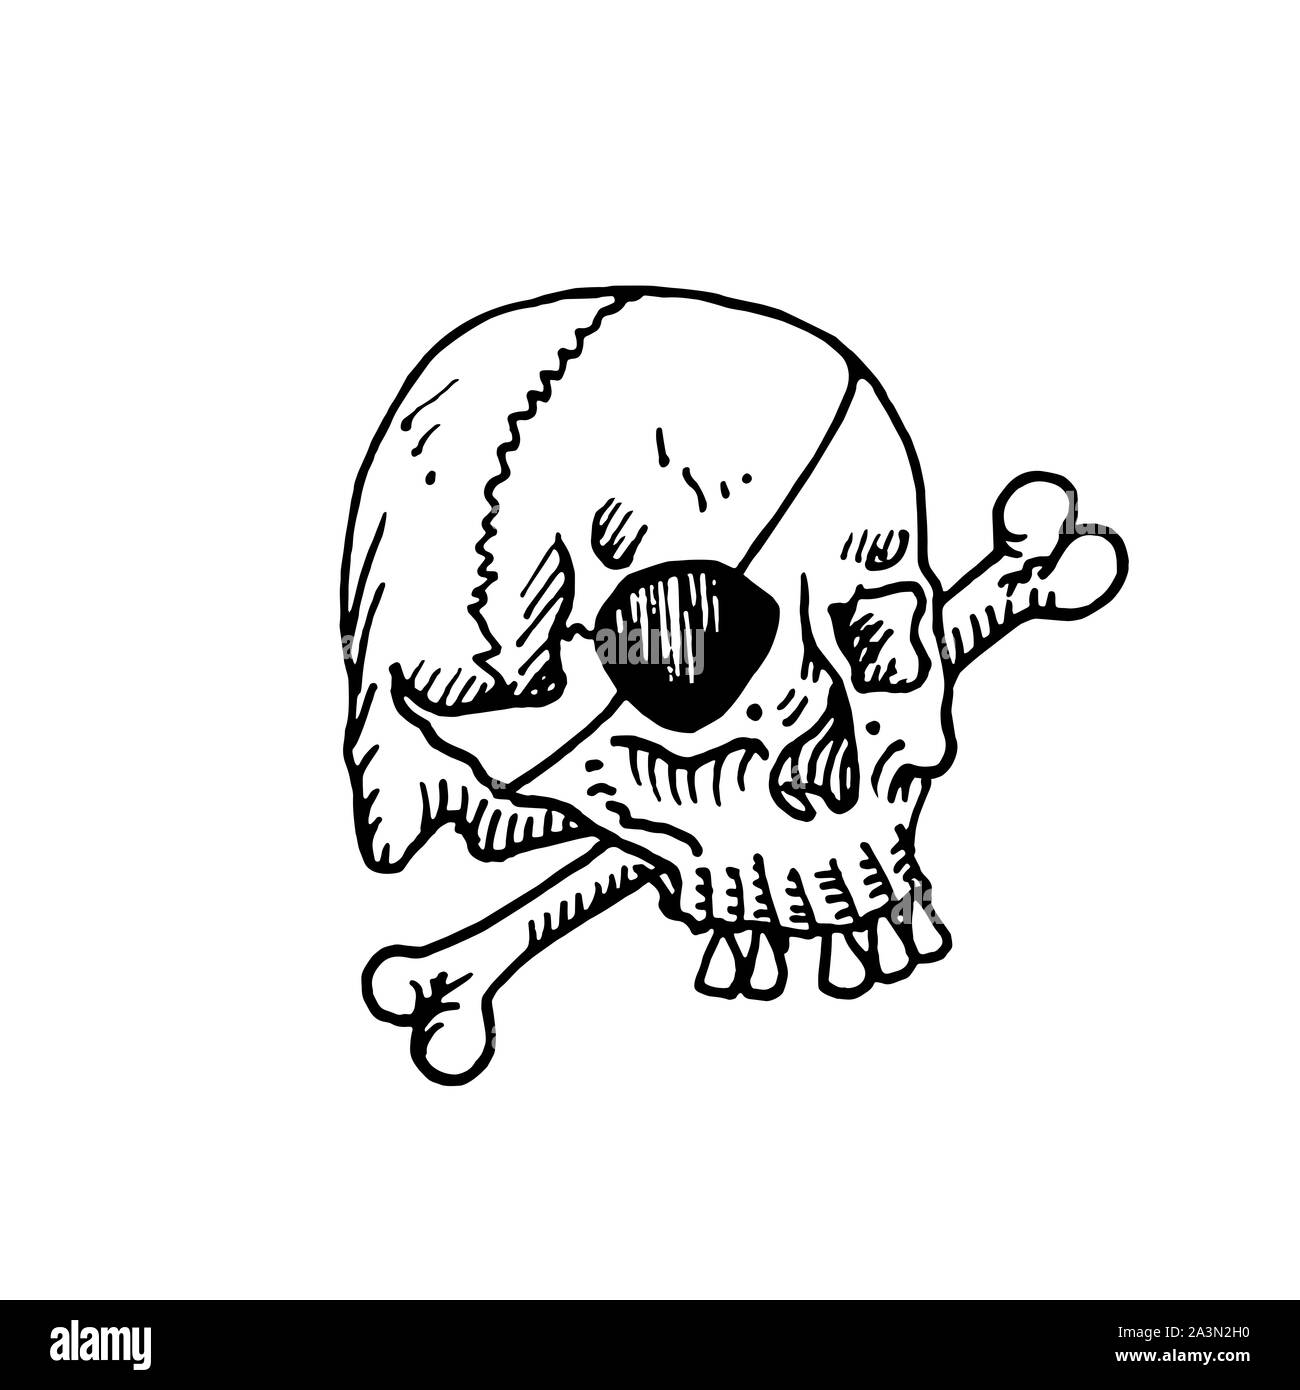 Skull with pirate eyepatch laying on bone, hand drawn doodle, sketch, black and white illustration Stock Photo